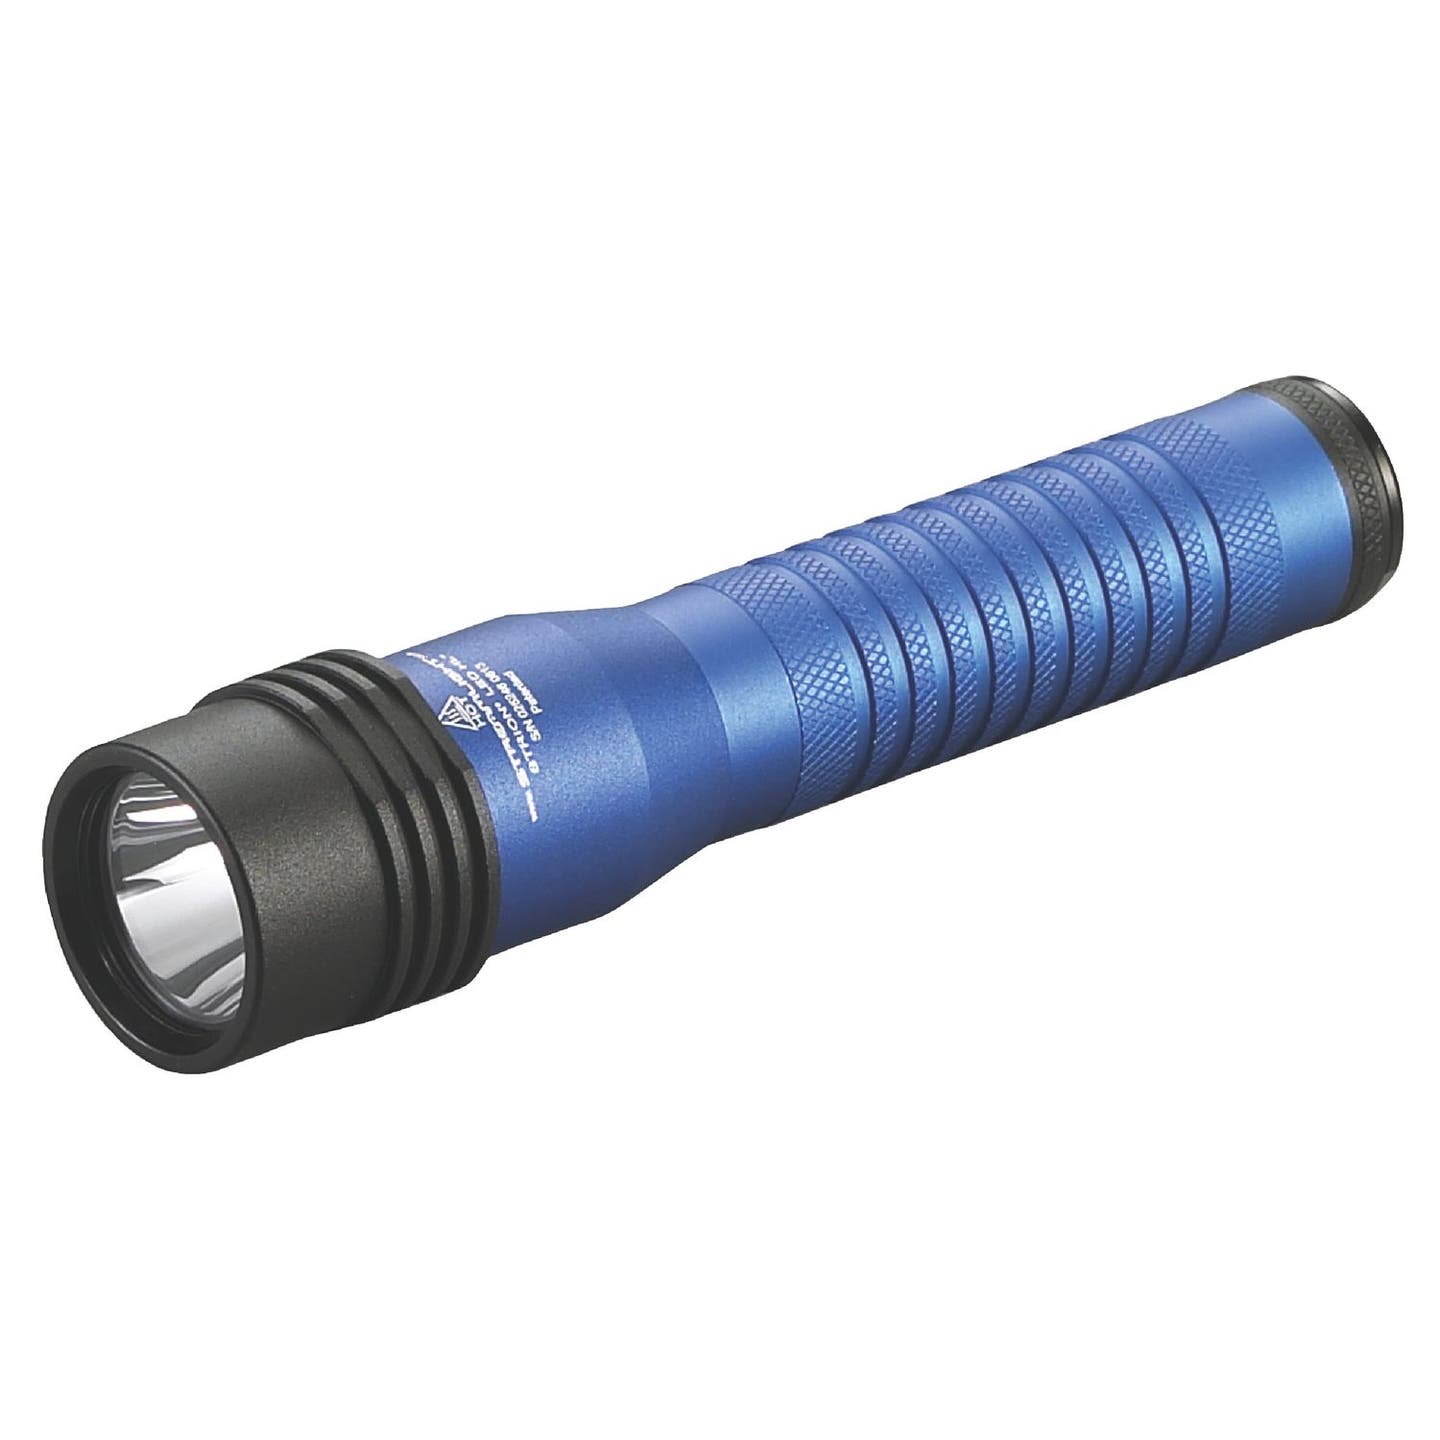 STREAMLIGHT STRION 615 LUMENS RECHARGEABLE FLASHLIGHT WITH PIGGYBACK CHARGER-BLUE